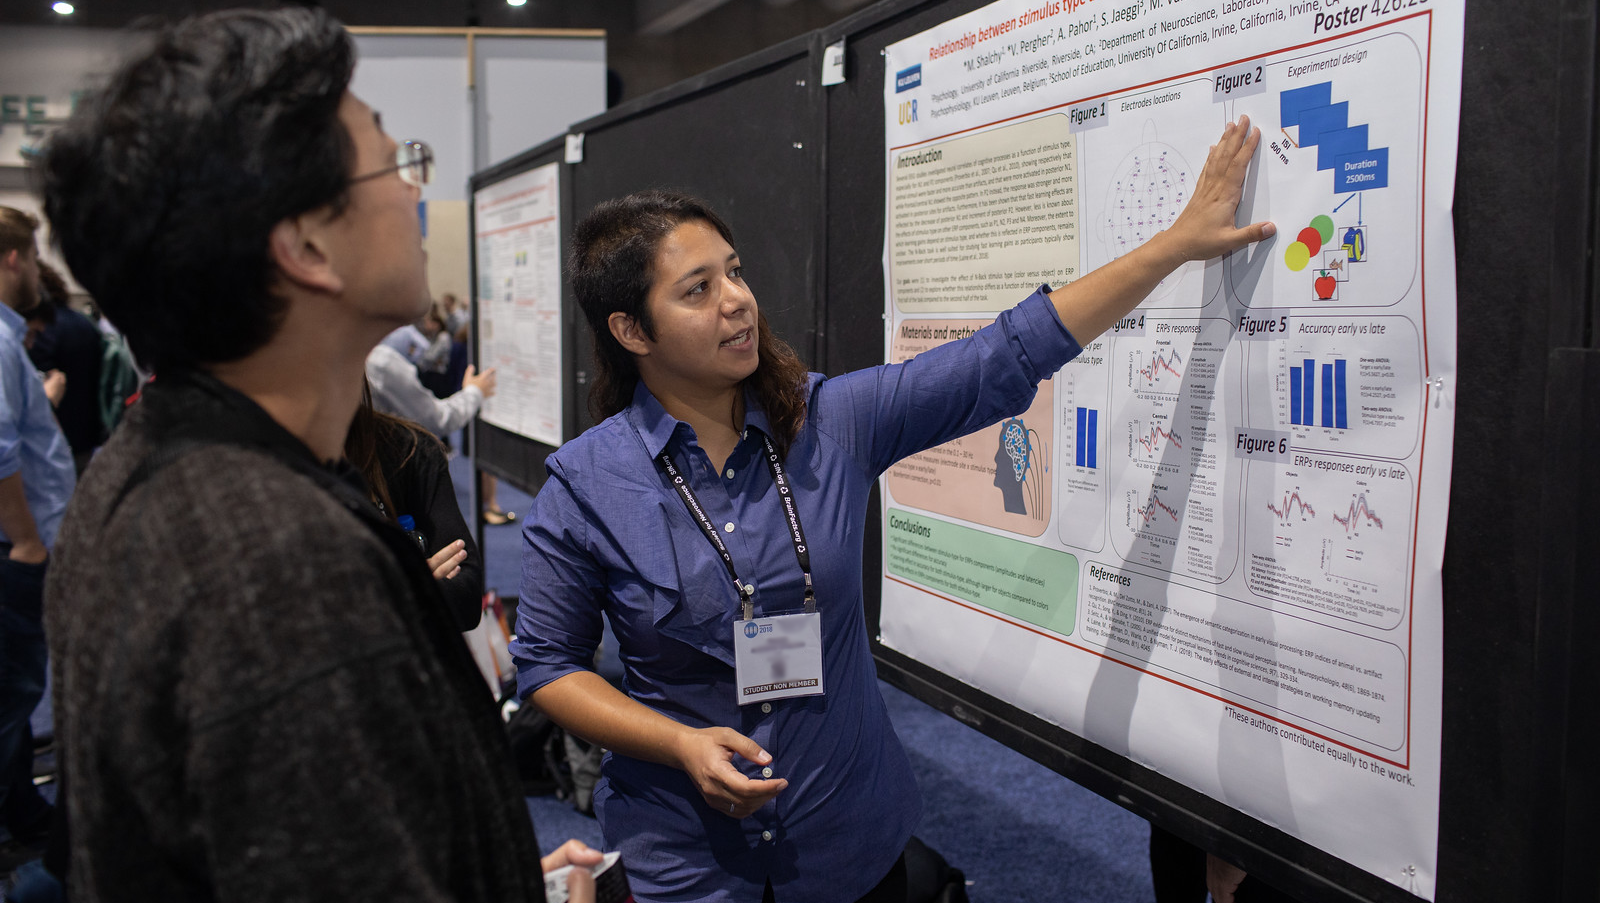 One Neuroscience 2018 attendee explaining poster presentation to another attendee